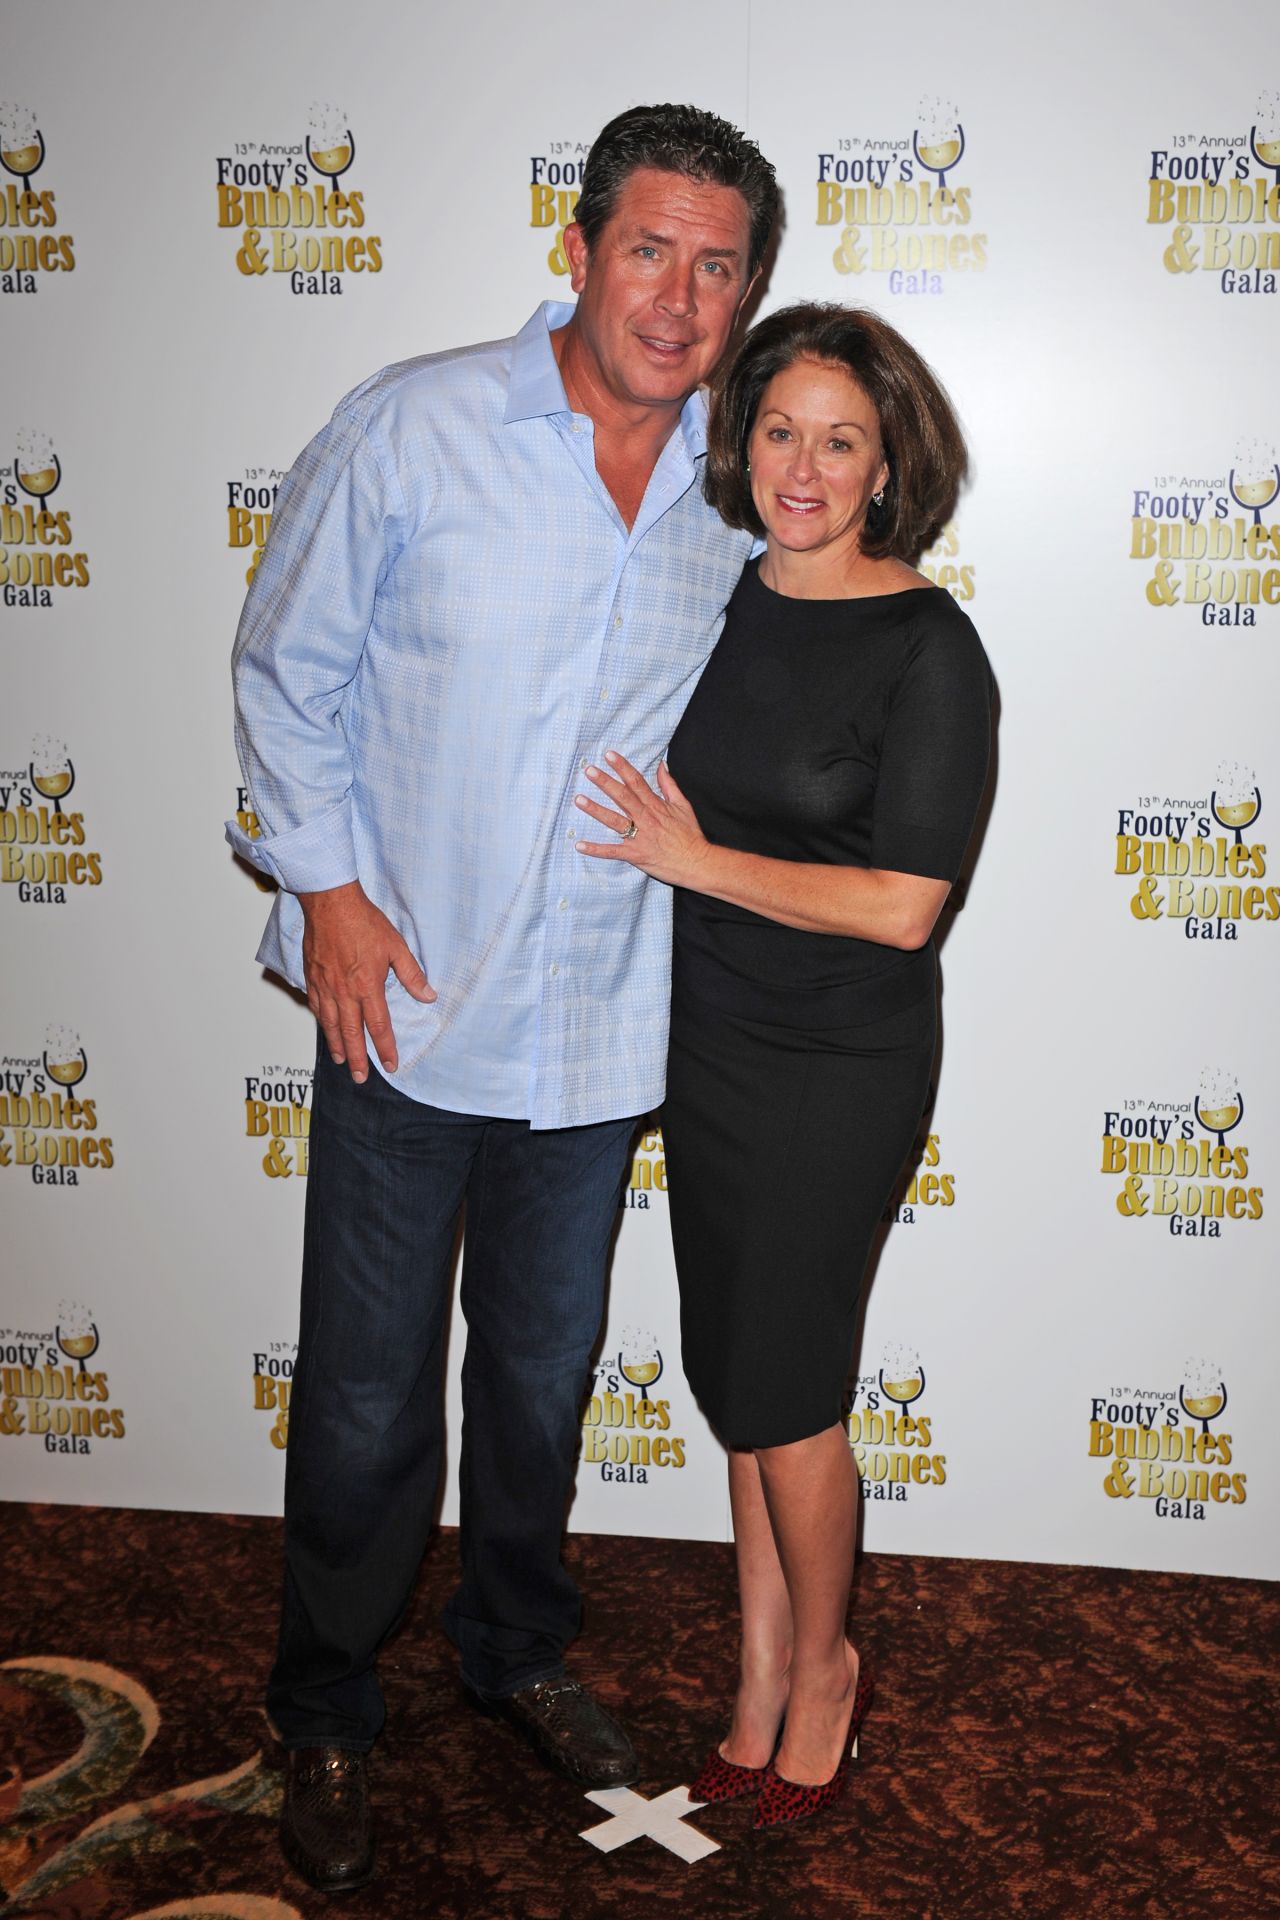 Former football player Dan Marino and wife Claire have been married since 1985. In 2013, it came to light that the legendary quarterback allegedly had an affair and child with  a production assistant at CBS Sports in 2005. <a href="http://nypost.com/2013/01/31/exclusive-nfl-legend-dan-marino-had-a-love-child-with-cbs-employee-in-2005/" target="_blank" target="_blank">In a statement issued to the New York Post</a>, Marino said: "'This is a personal and private matter. I take full responsibility both personally and financially for my actions now as I did then."